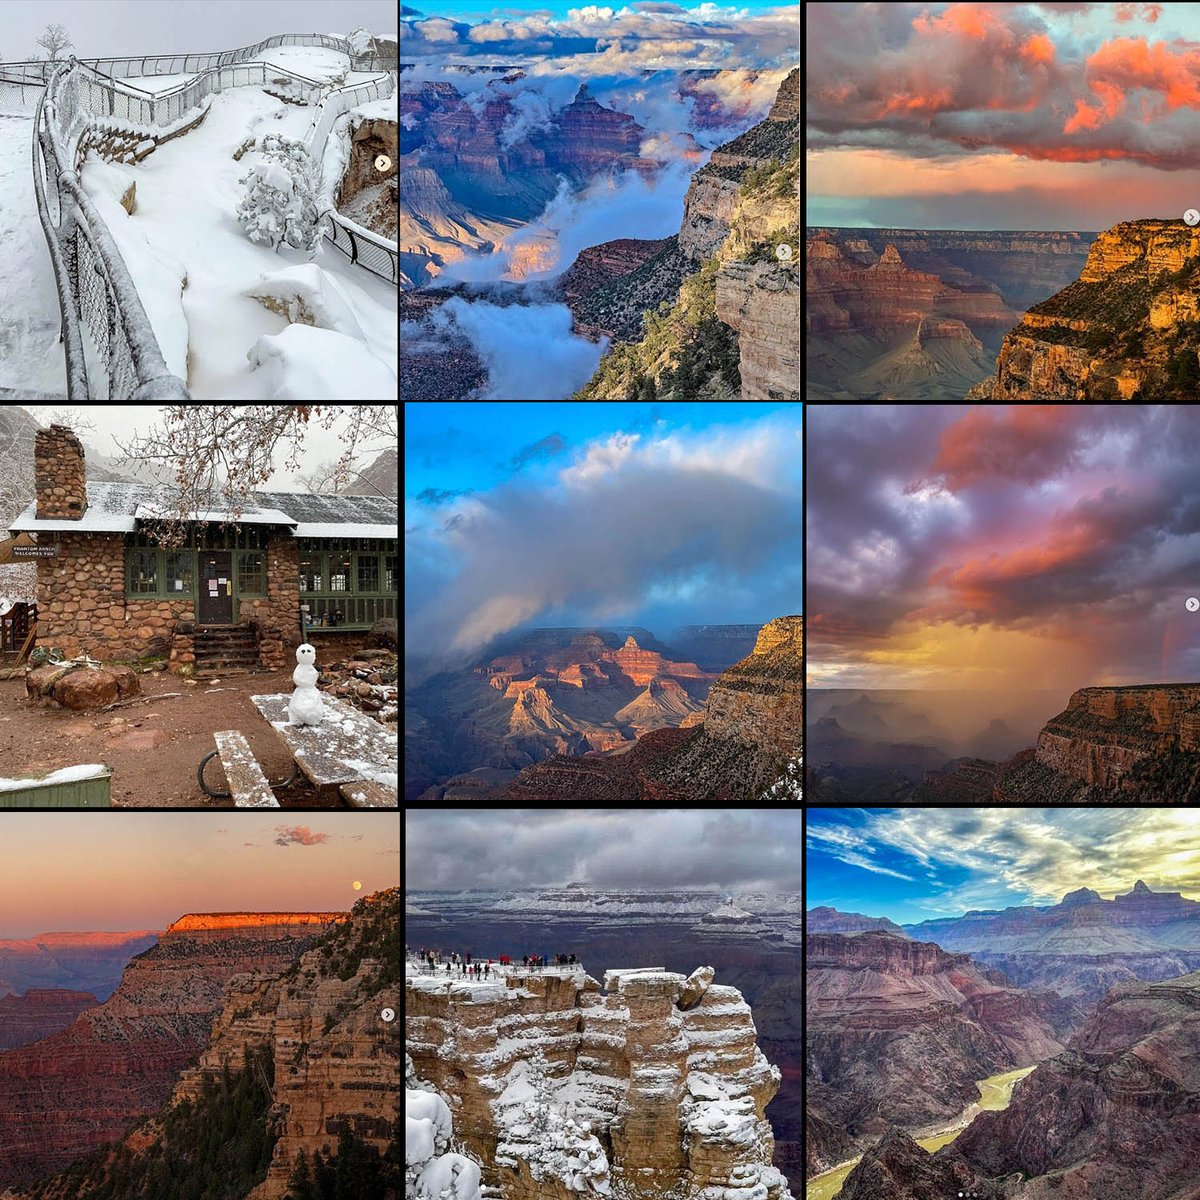 Here's the Top 9 photos our Instagram followers selected from the 270+ images we posted during 2023 > instagram.com/grandcanyonnps/ Many posts were made in collaboration with the park's official nonprofit partner > instagram.com/grand_canyon_c… #HappyNewYear #HappyNewYear2024 #GrandCanyon